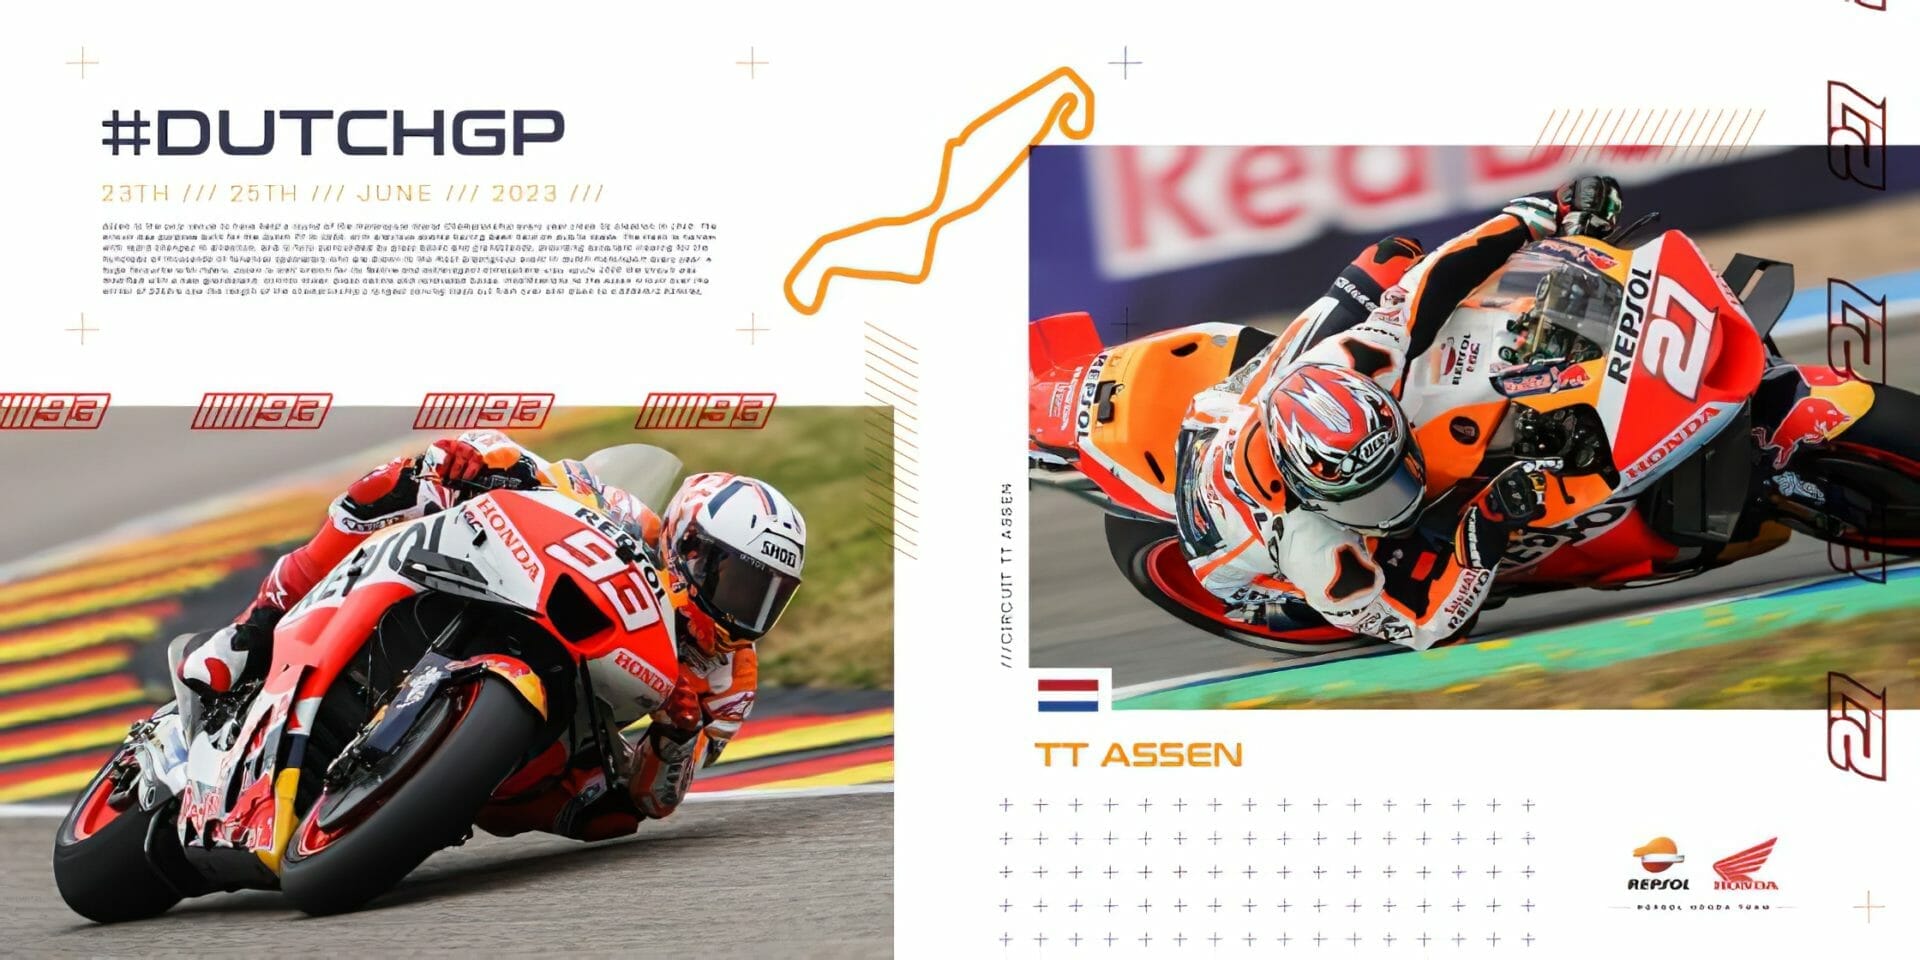 Marc Marquez rides at Assen – Lecuona steps in for Mir